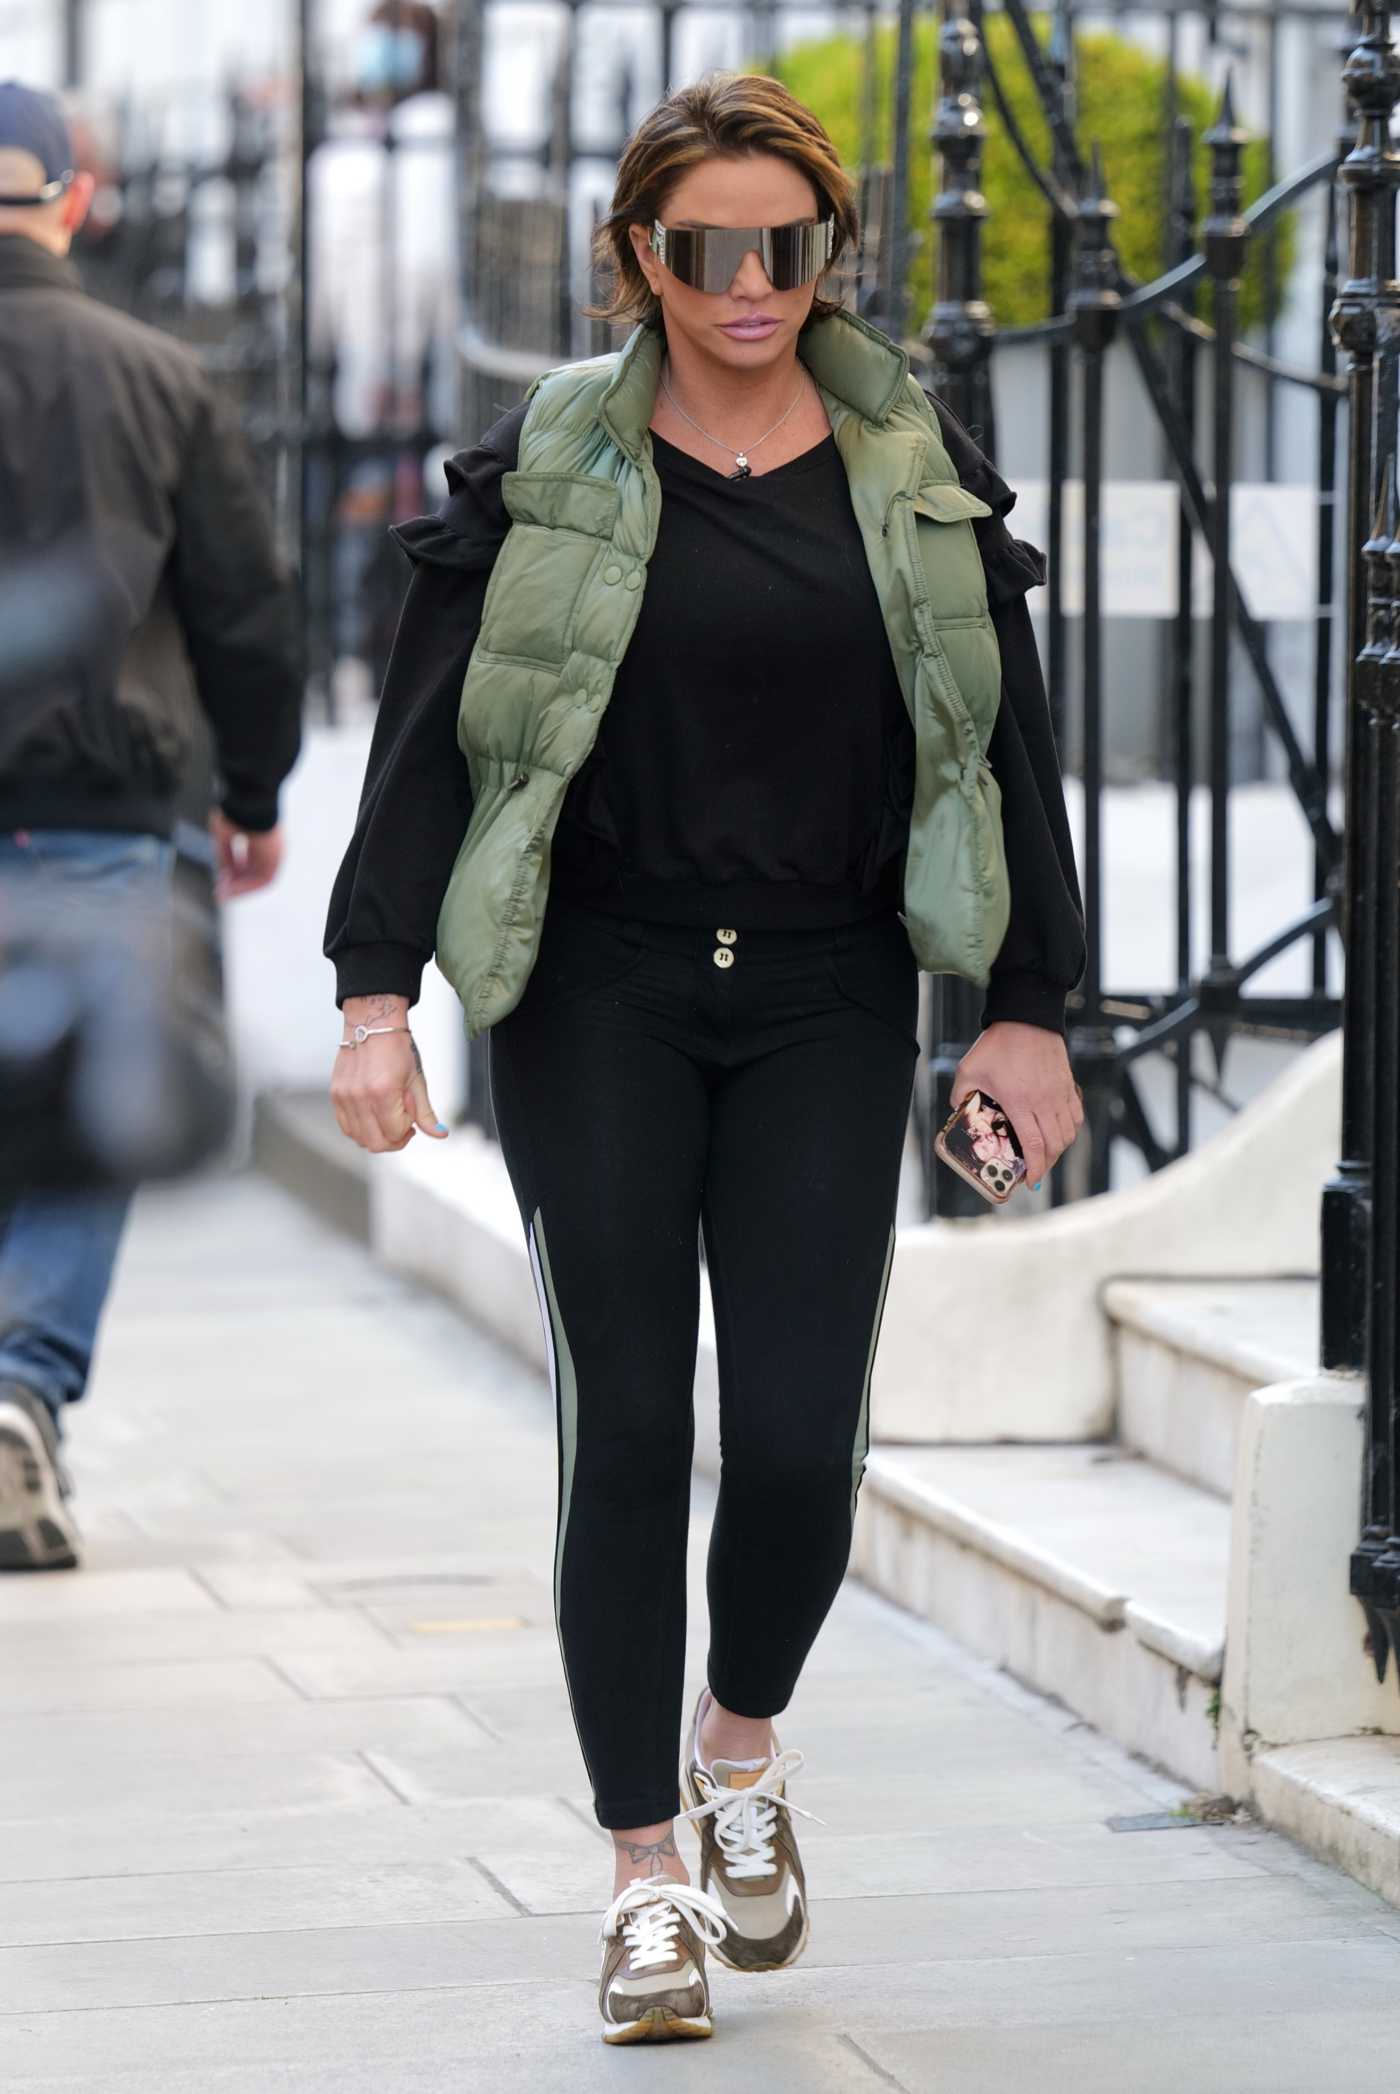 Katie Price in a Green Vest Was Seen Out in London 04/25/2021